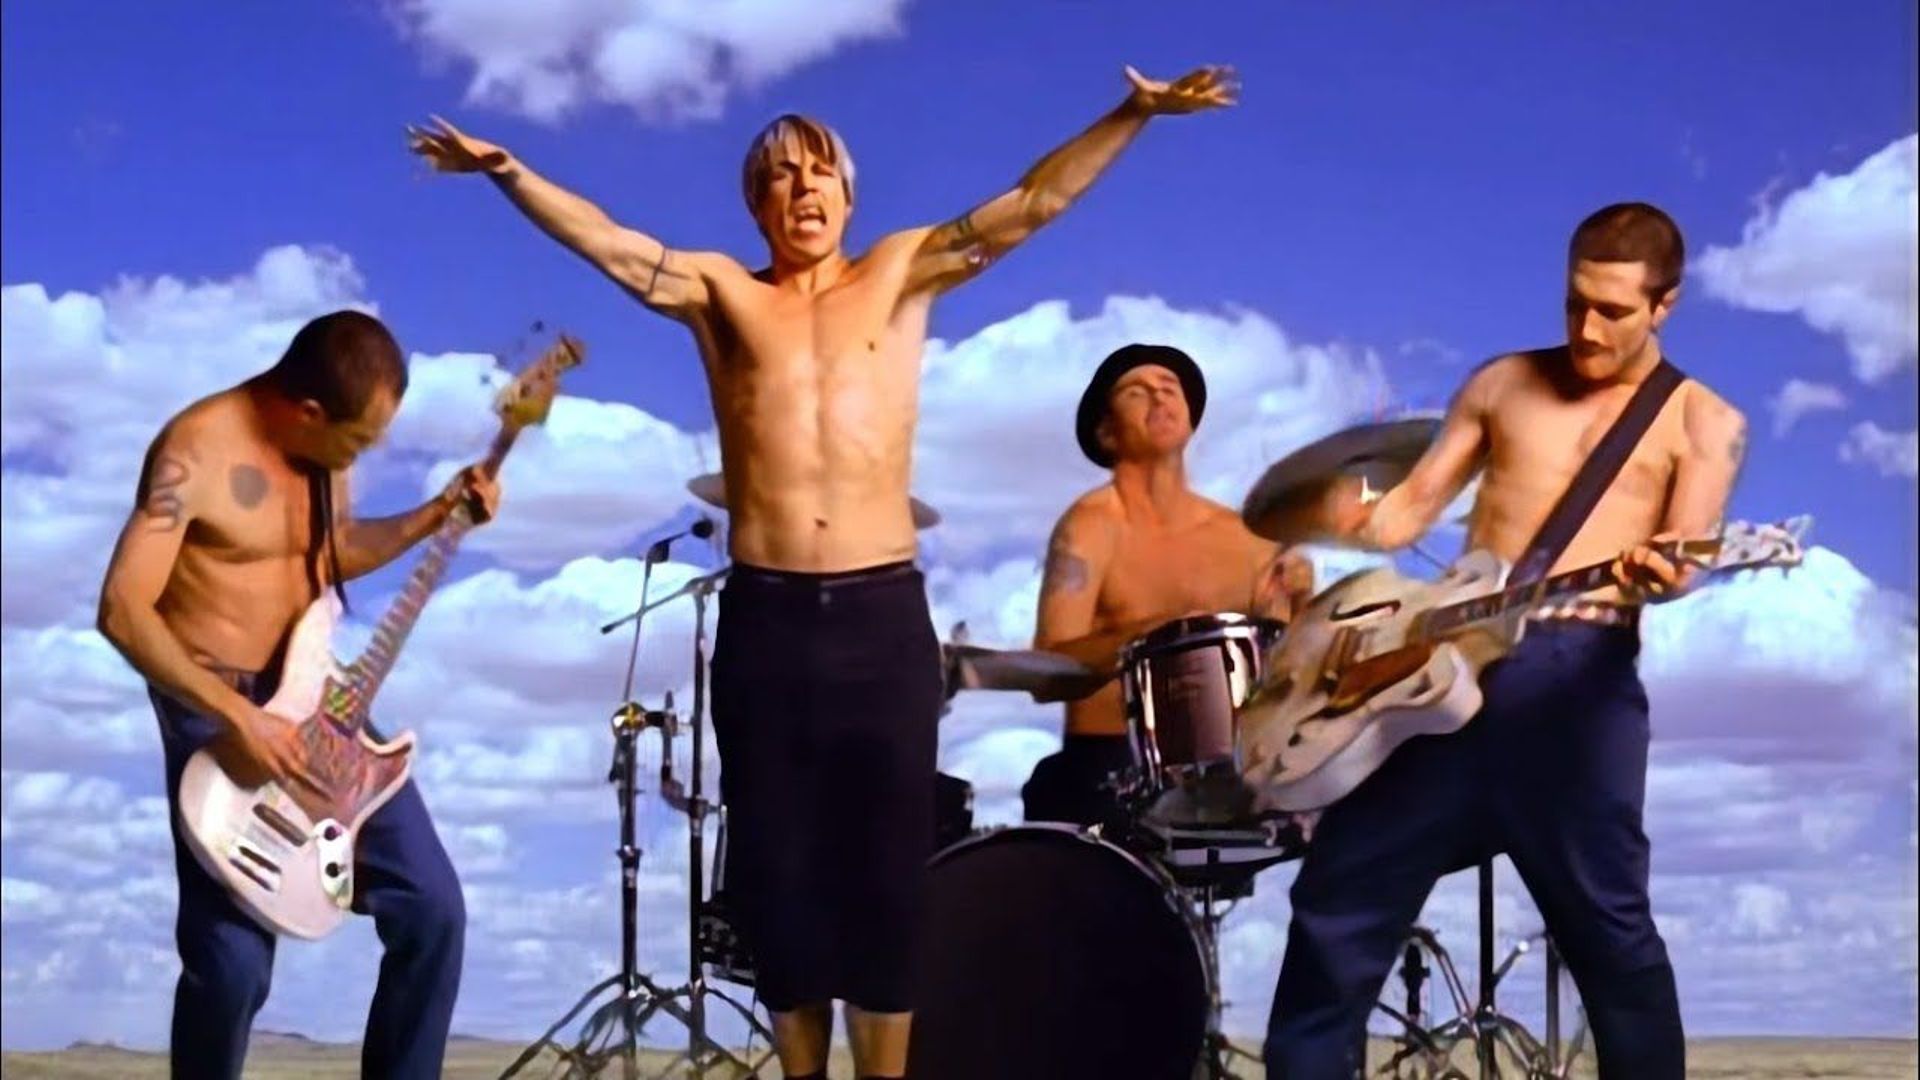 Клипы hot chili peppers. RHCP 1999. Red hot Chili Peppers 1999. Red hot Chili Peppers Californication клип. RHCP Californication обложка.